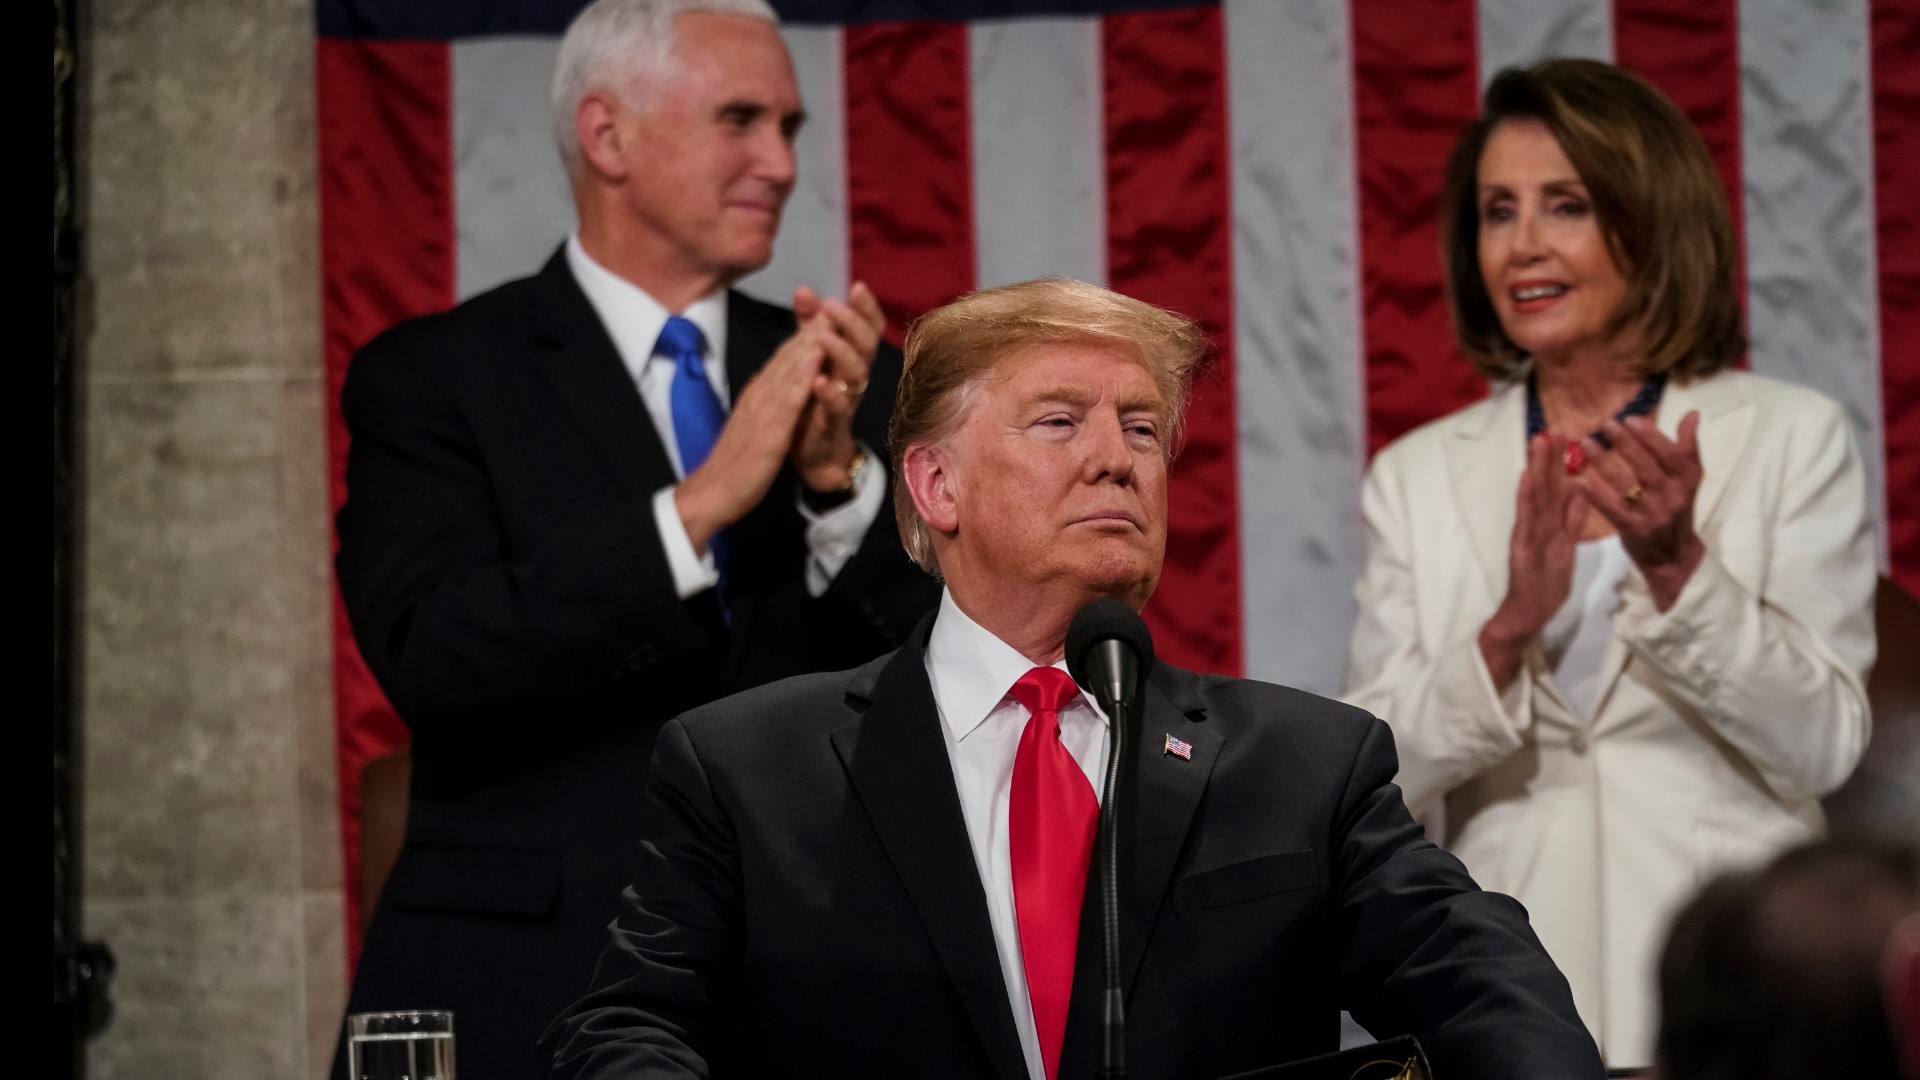 A brief moment of House Speaker Nancy Pelosi clapping at President Trump during the 2019 State of the Union Address goes viral on social media. Plus, Samsung created a refrigerator dating application that is similar to Tinder and Bumble.